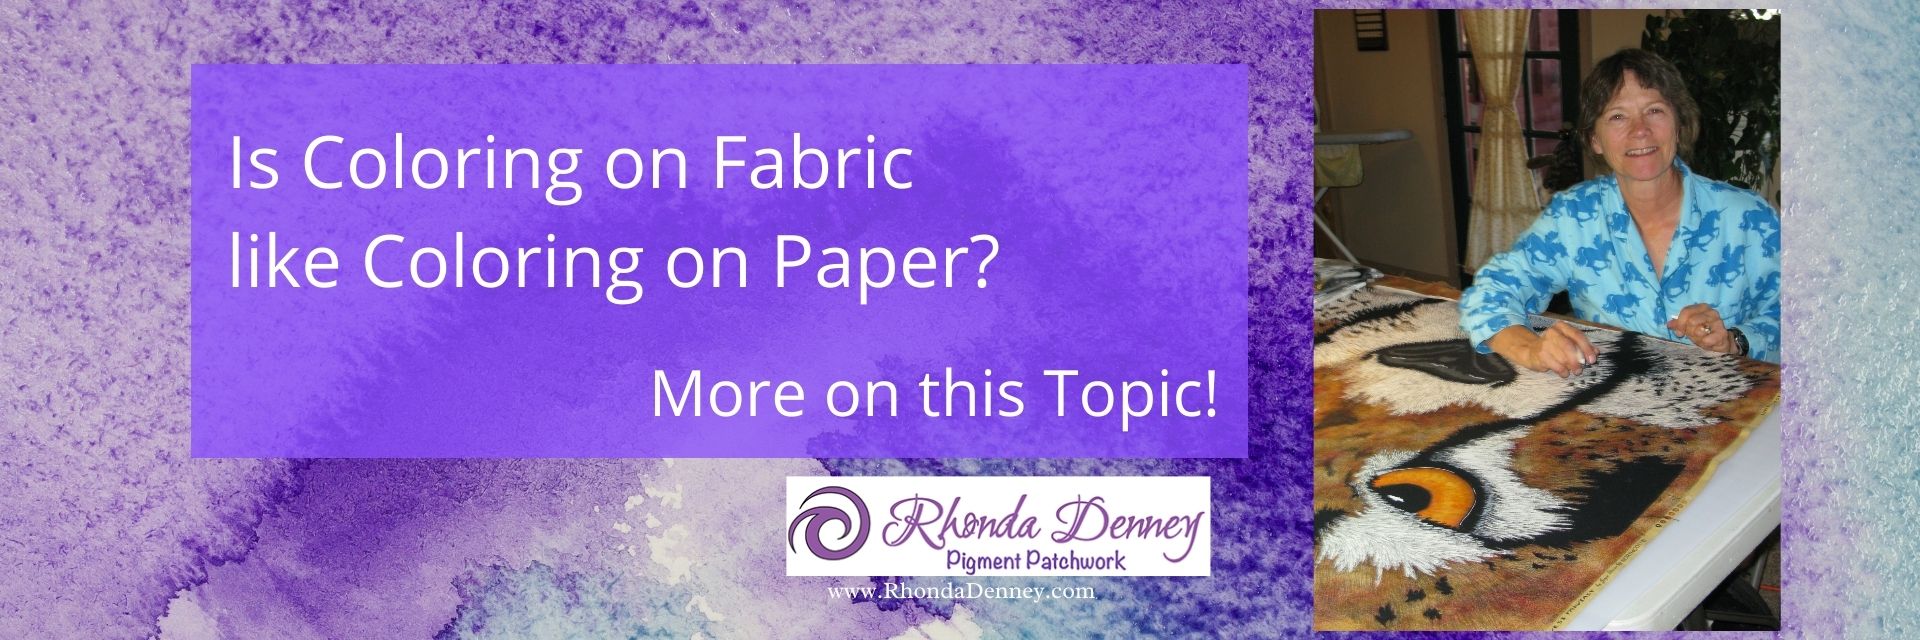 Rhonda Denney - Is Coloring on Fabric like Coloring on Paper? More on this topic!